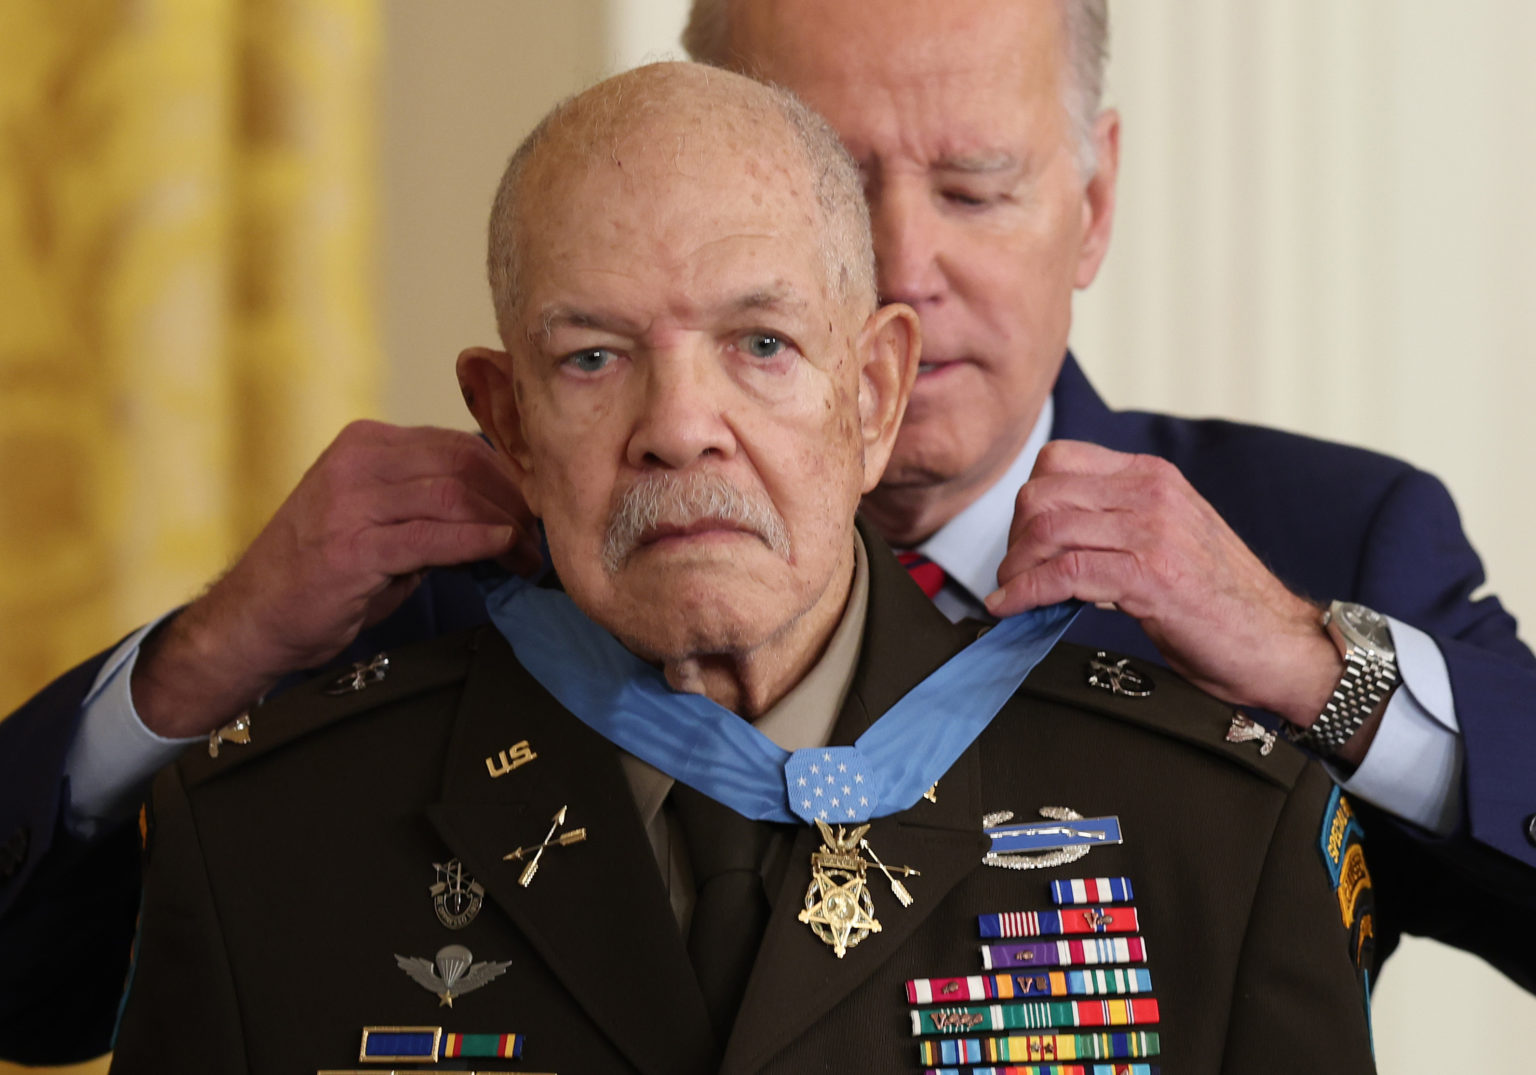 President Biden Awards The Medal Of Honor To Retired Army Colonel Paris Davis For Service During